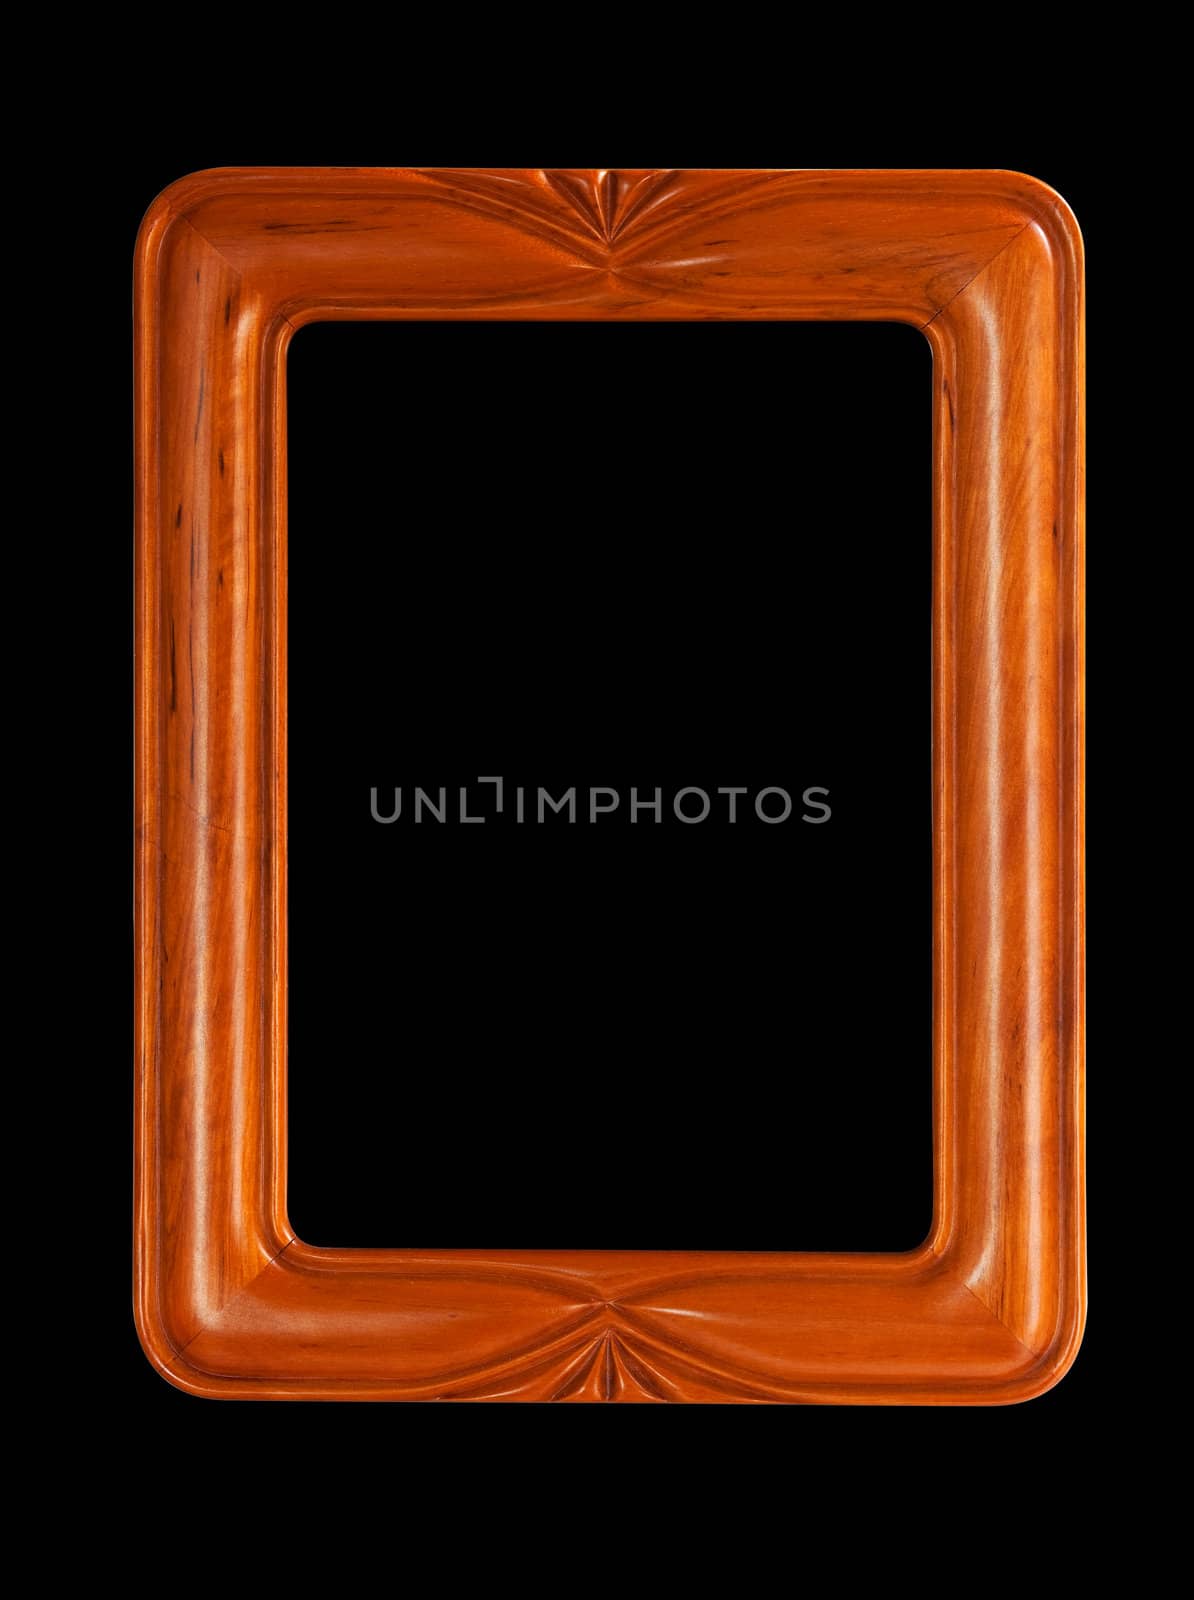 Isolated teak colored carved picture frame against black